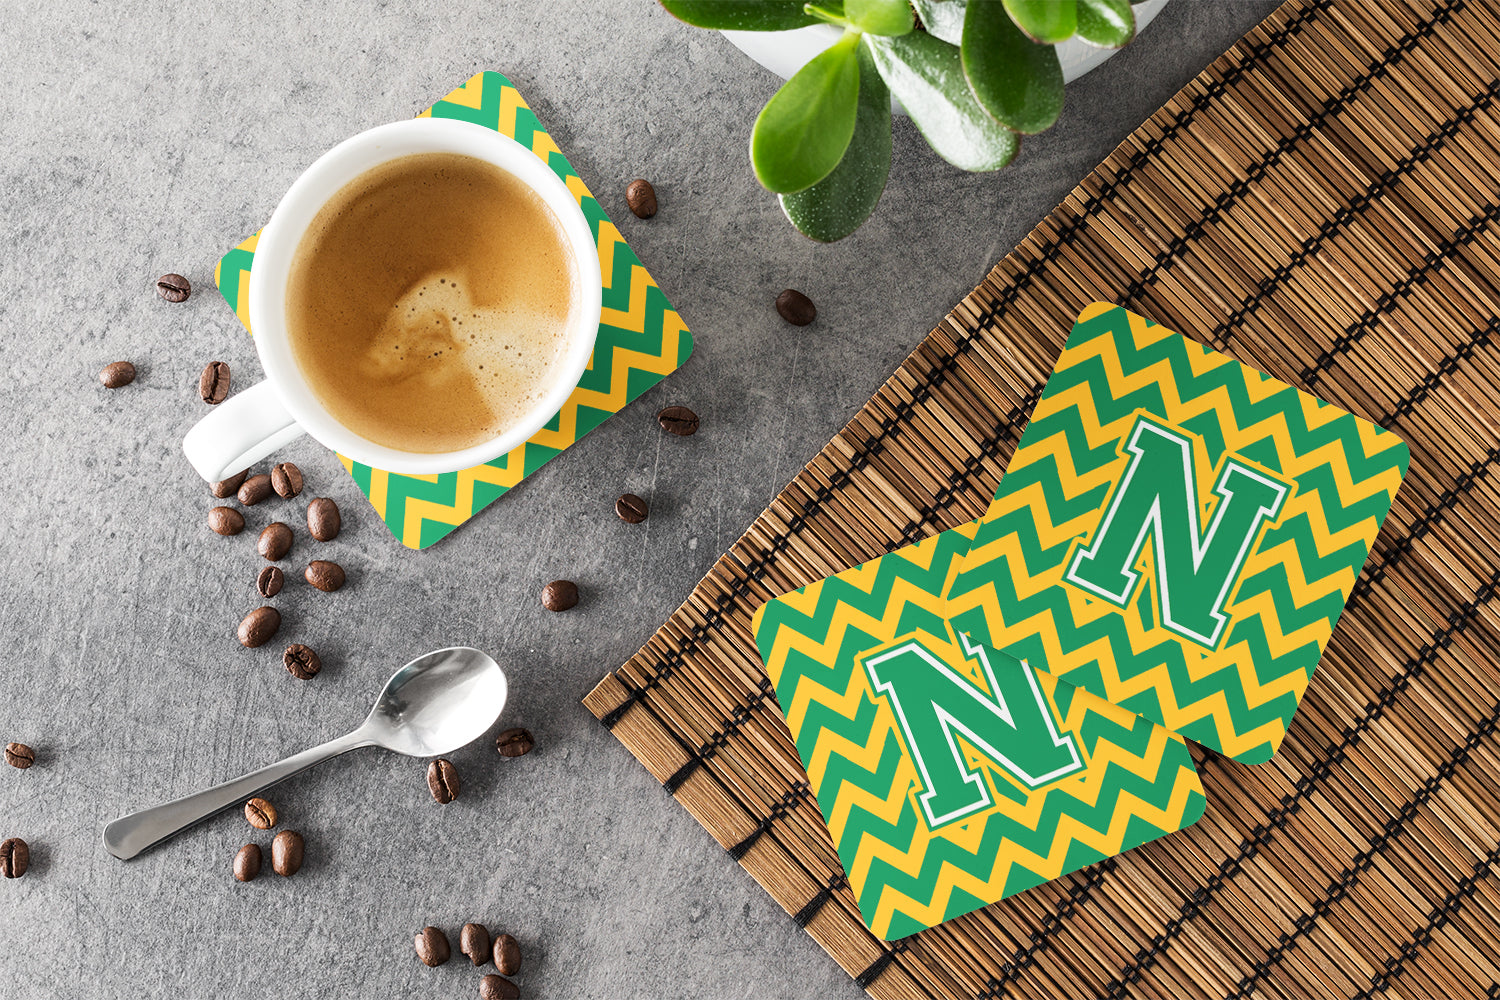 Letter N Chevron Green and Gold Foam Coaster Set of 4 CJ1059-NFC - the-store.com